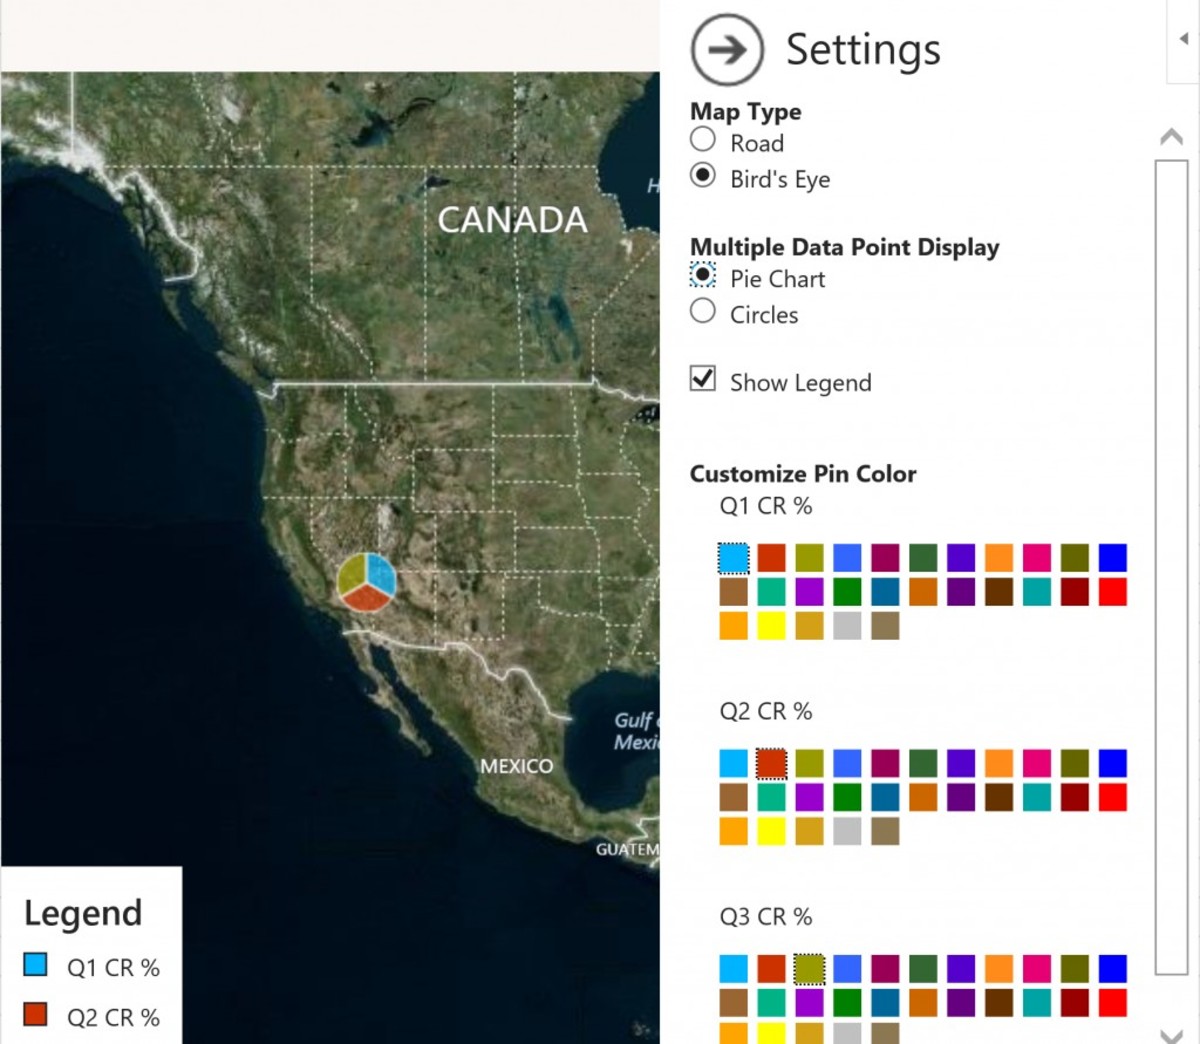 A view of The Bing Map settings.